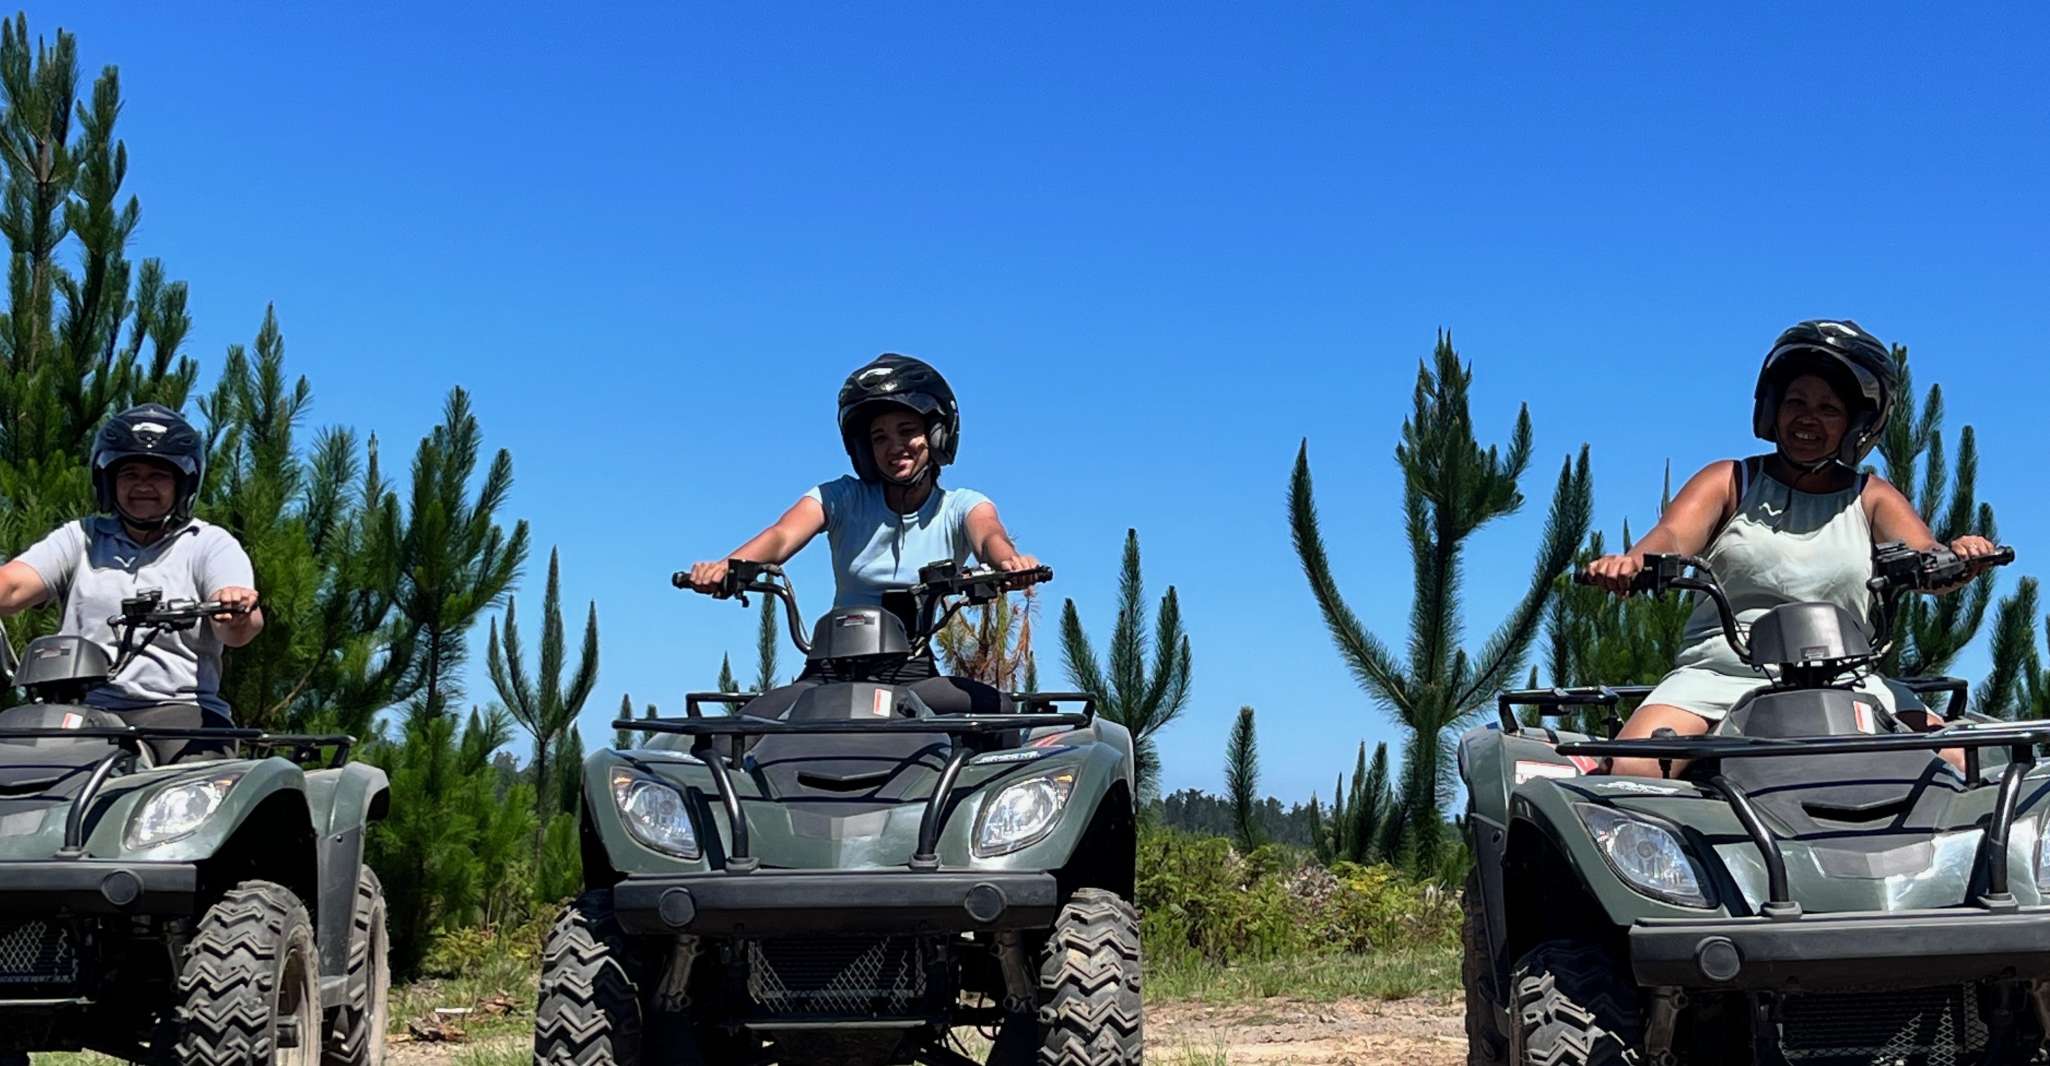 Knysna, Guided Quad Bike Tour in the Forest - Housity